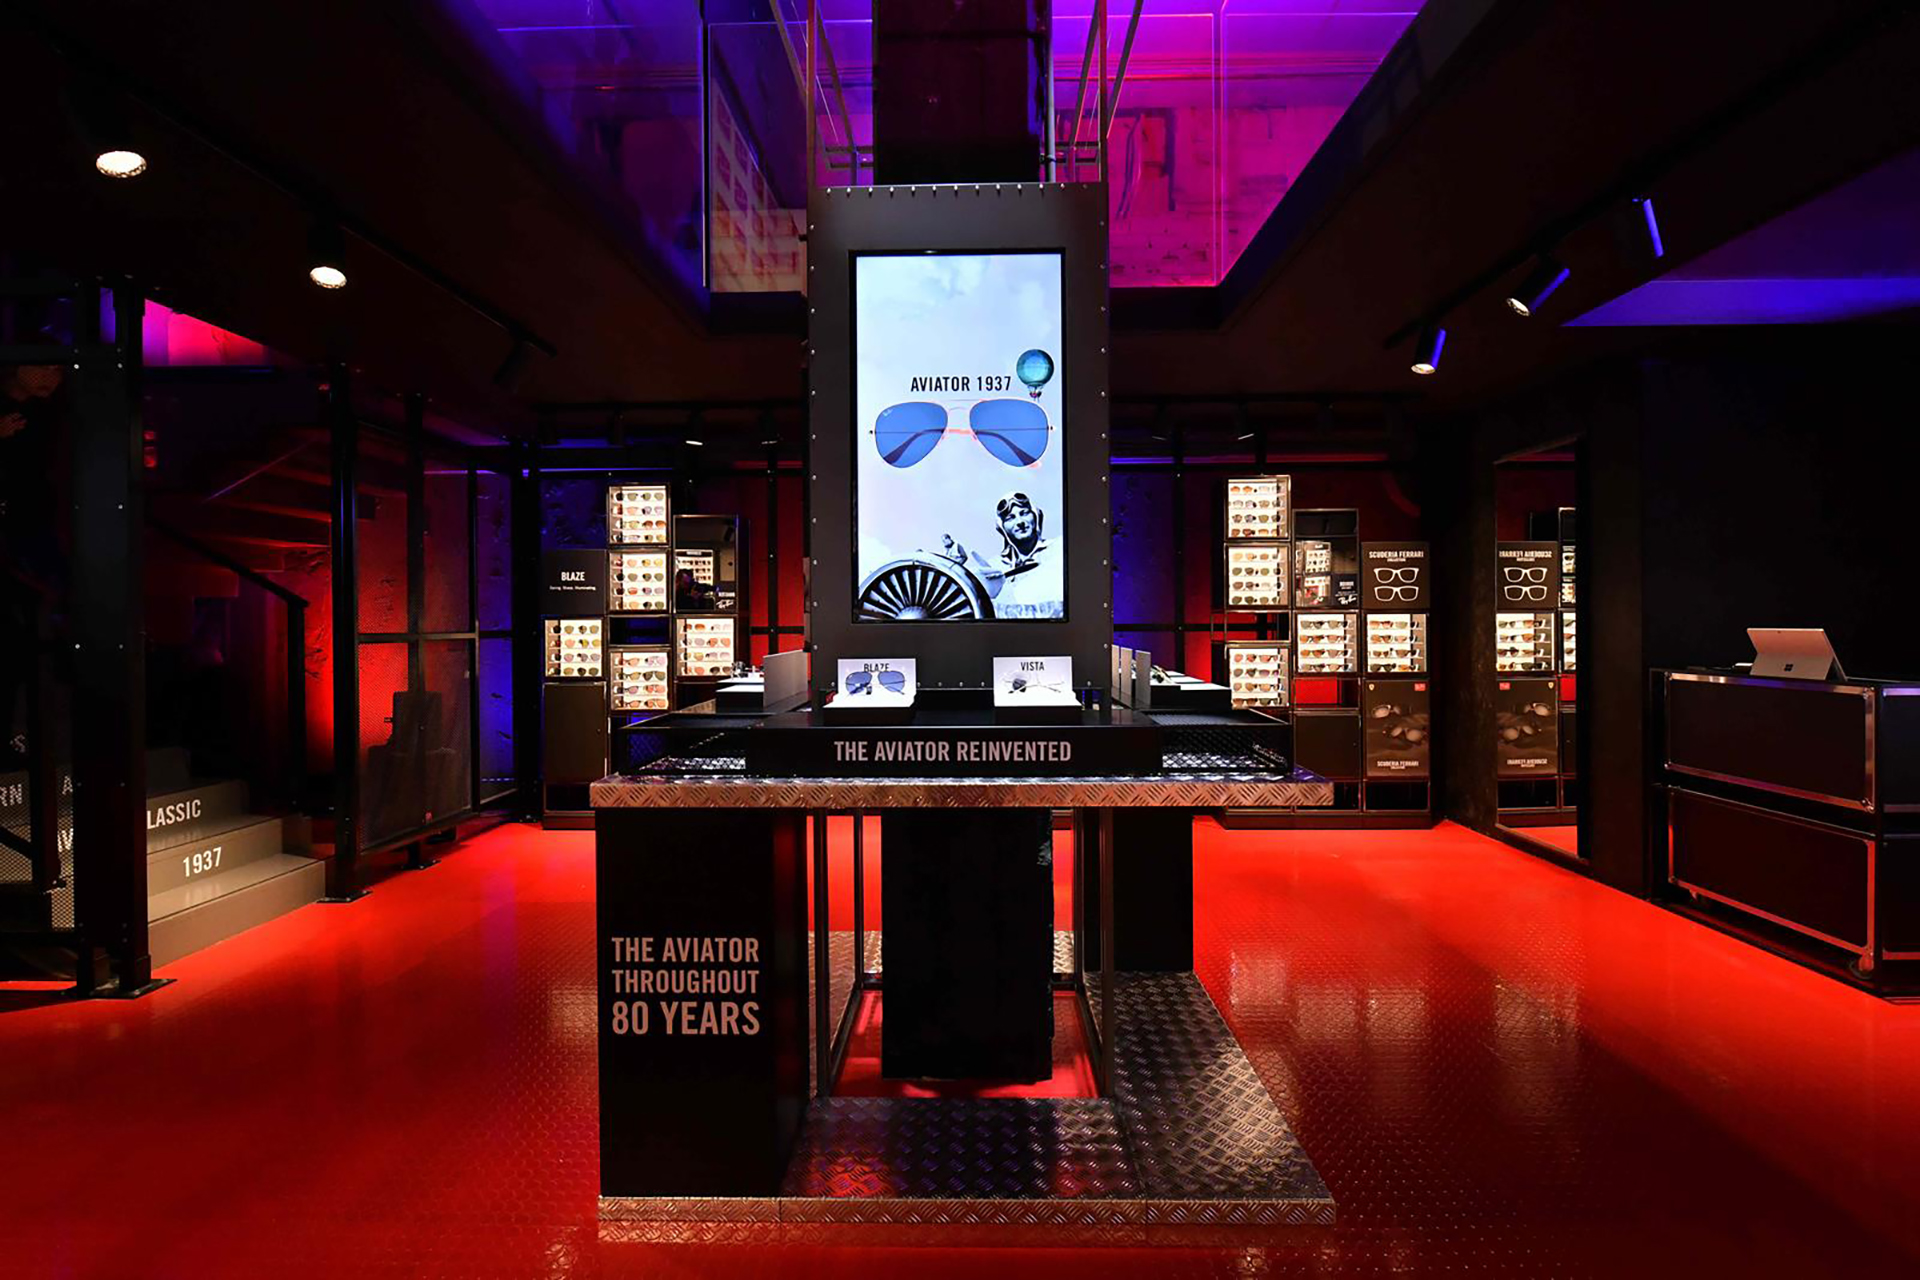 Ray Ban pop up store in Italy | PopUppens